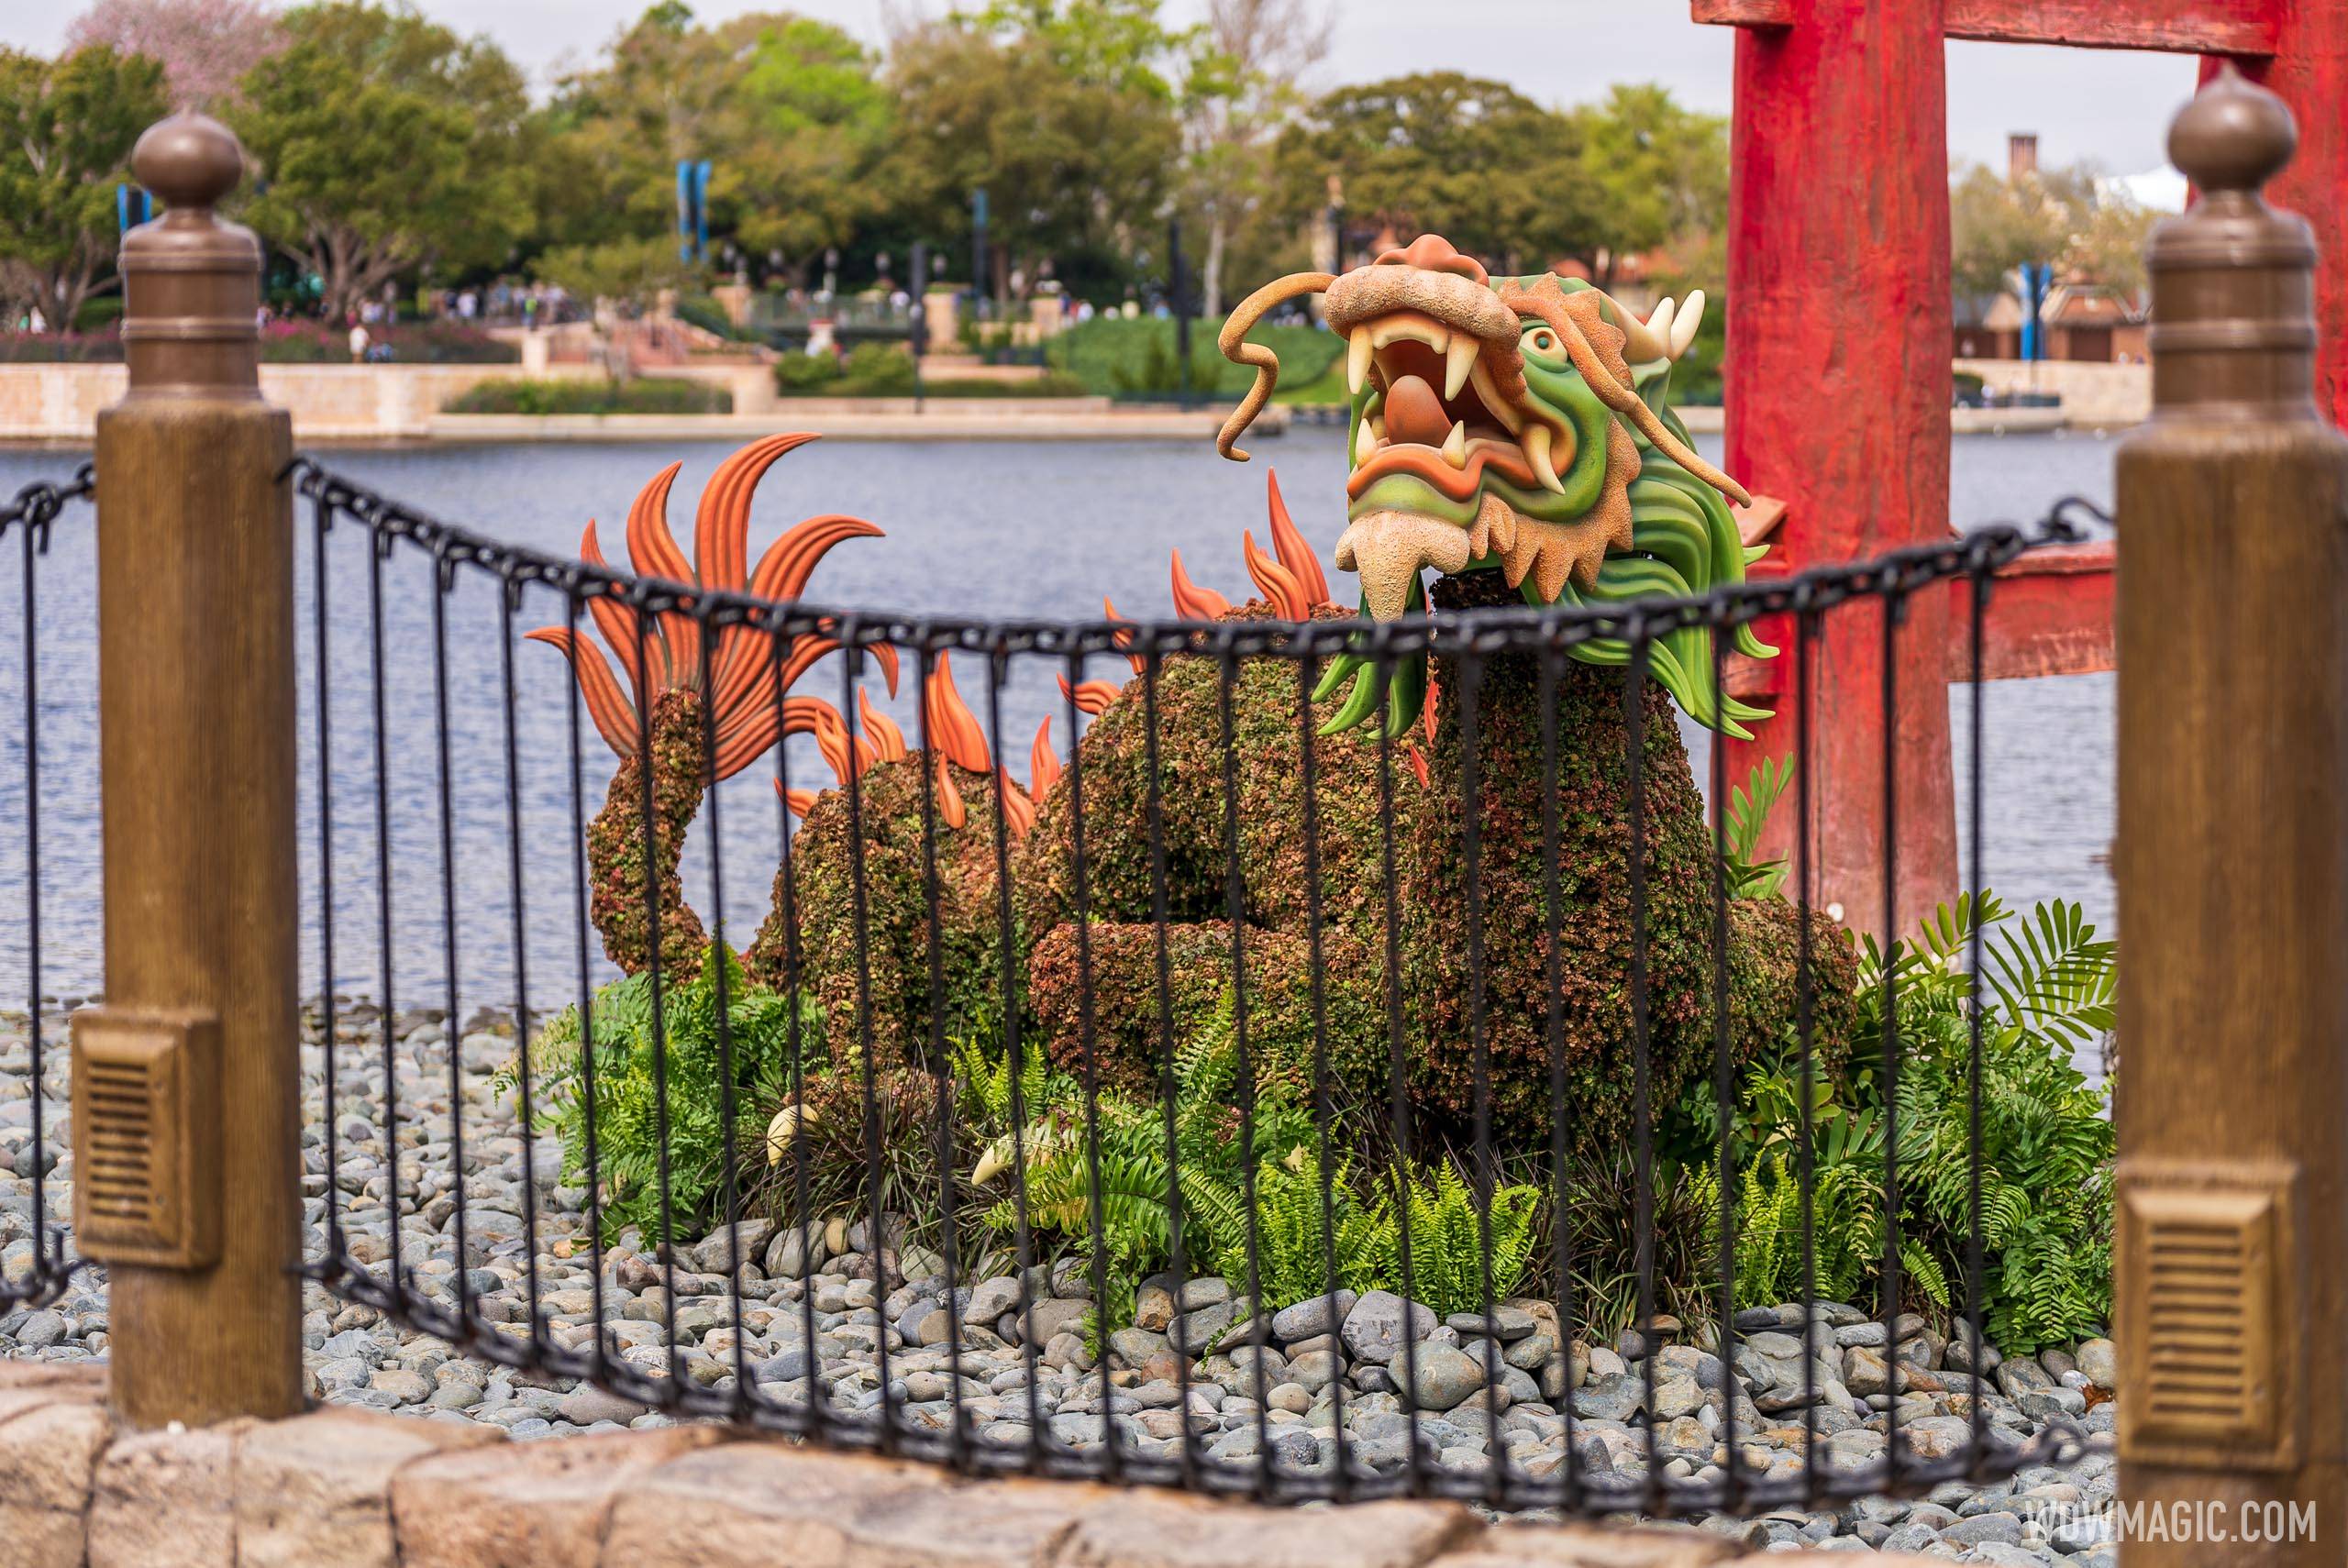 2022 EPCOT International Flower and Garden Festival topiaries and gardens